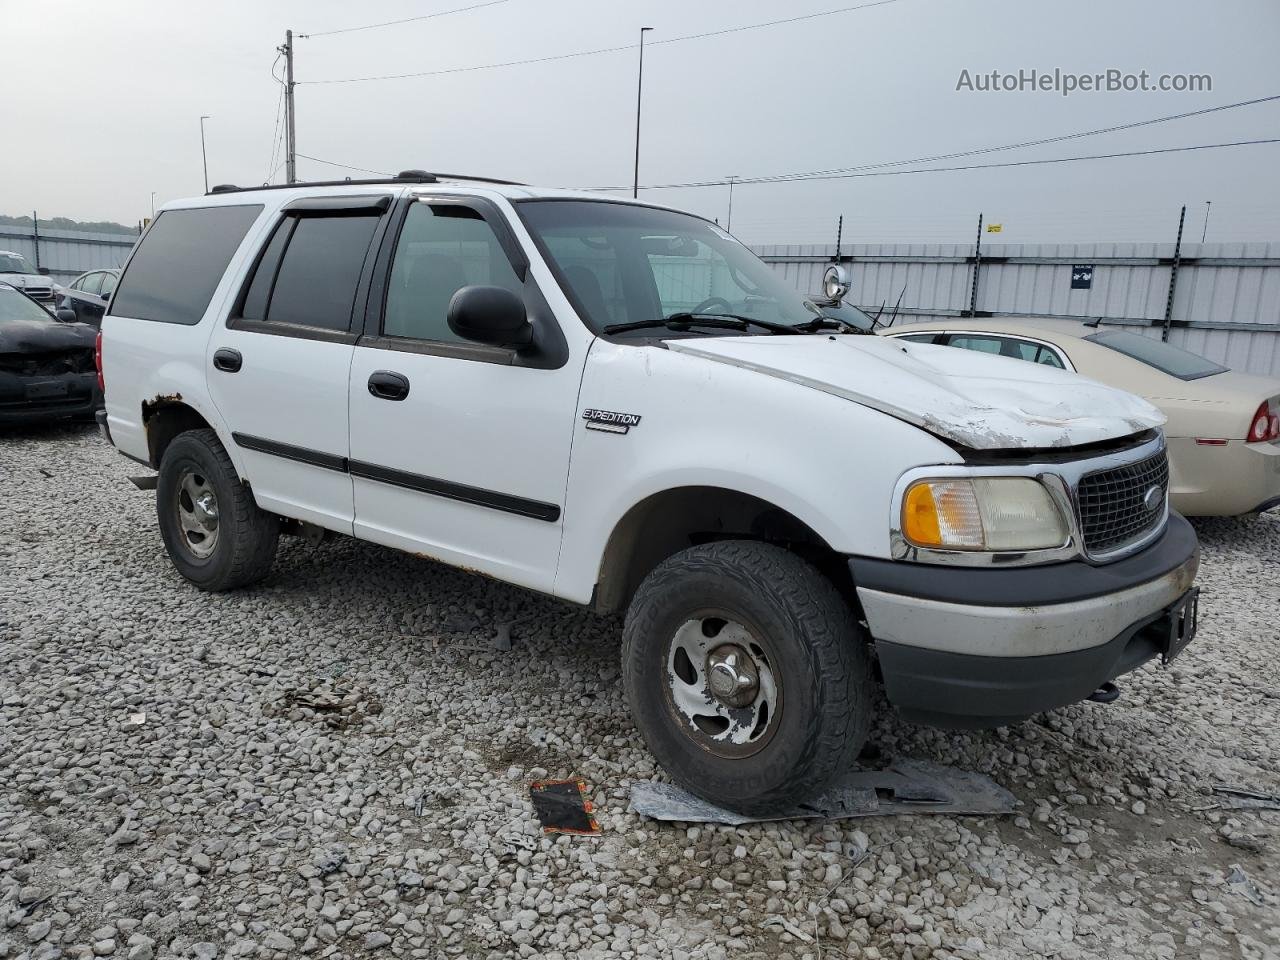 2001 Ford Expedition Xlt White vin: 1FMRU16WX1LB17321